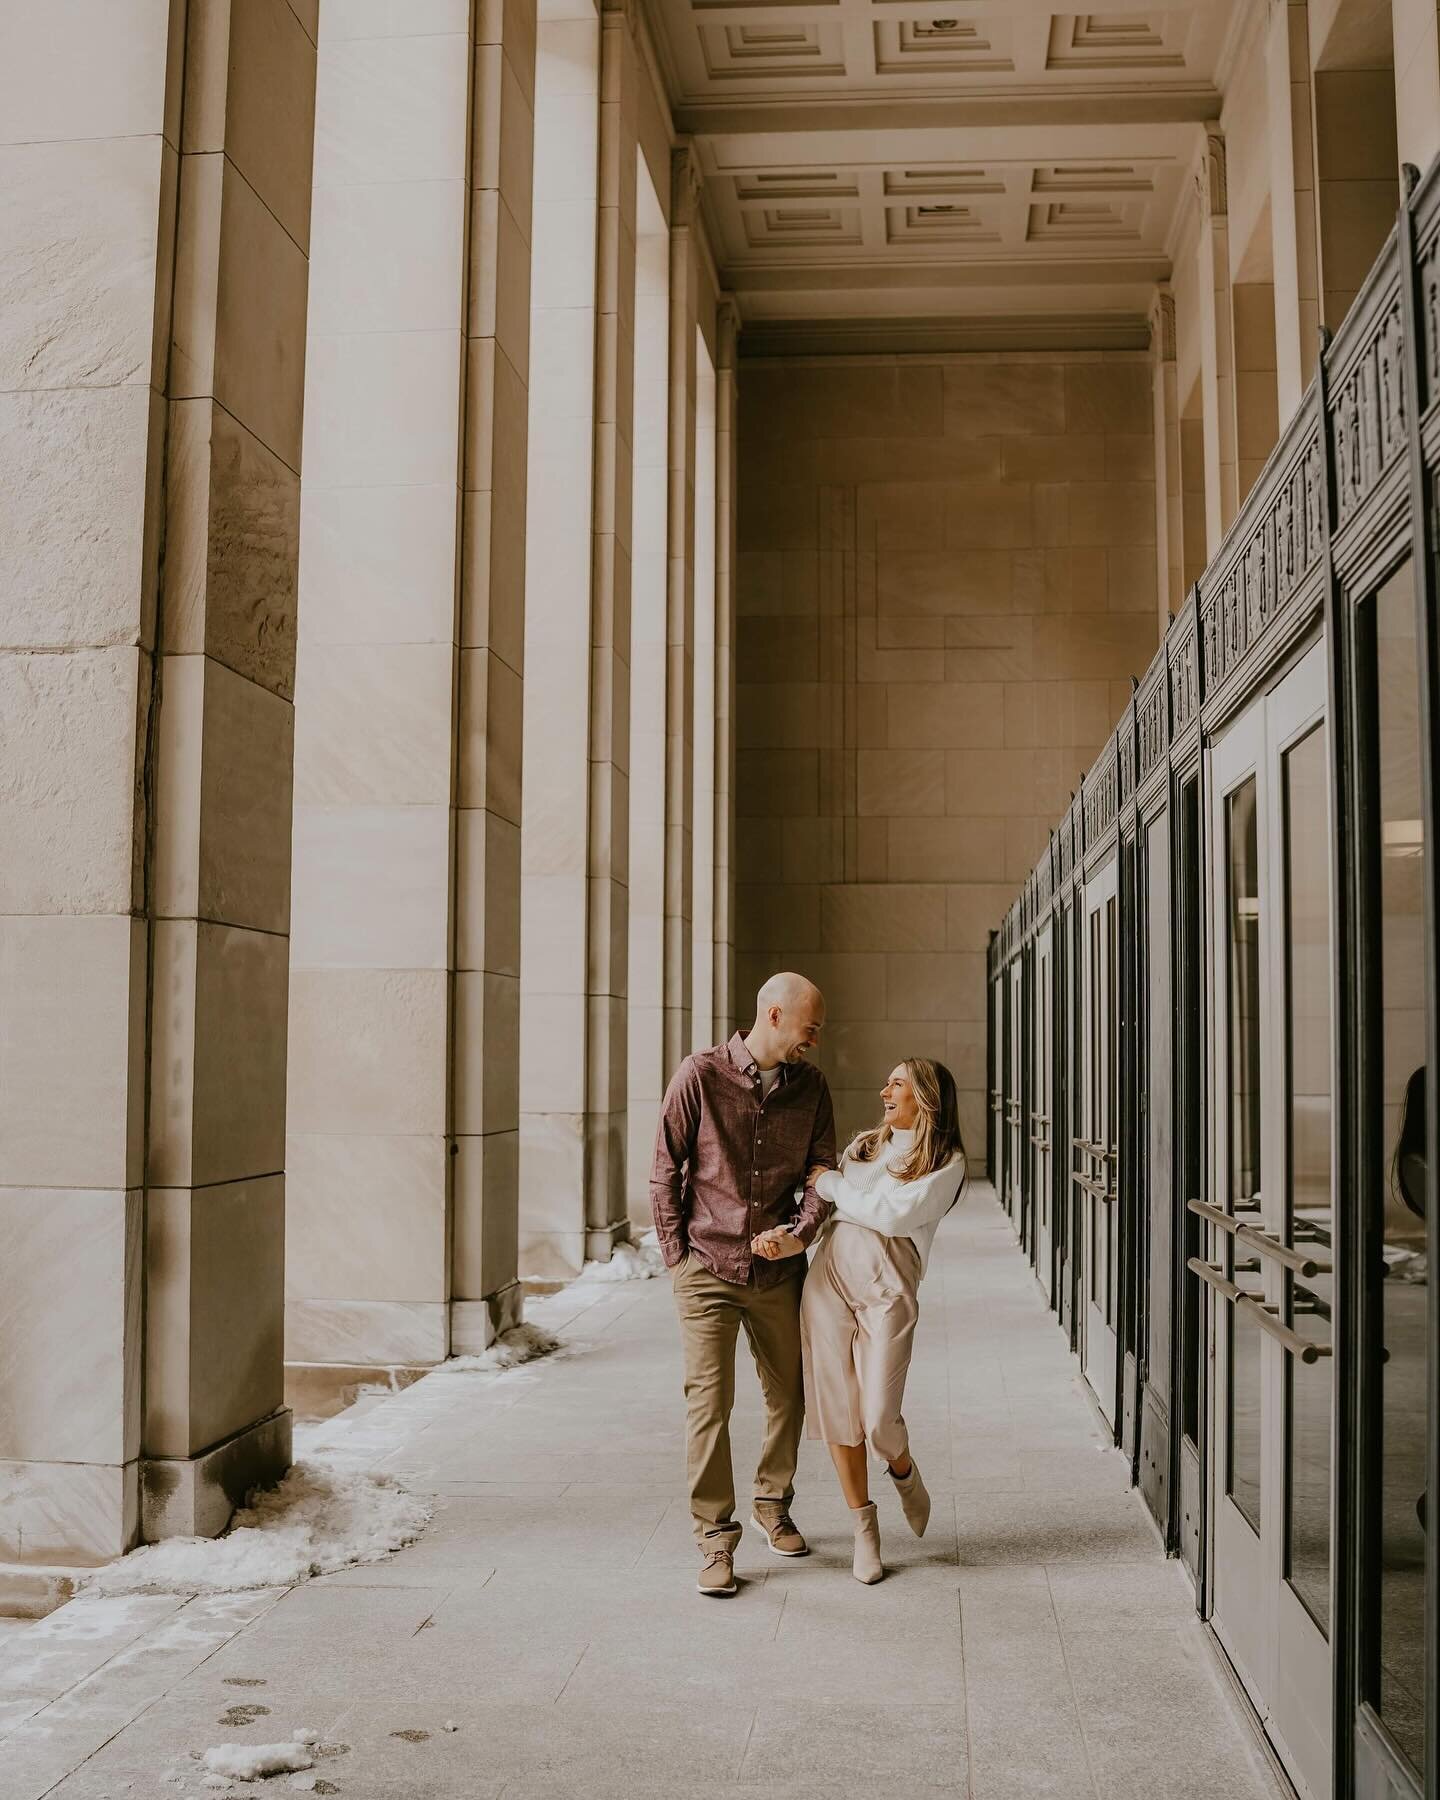 Wintery dowtown engagement sessions might have my heart. 🤍

I seriously had so much fun running around GR and fighting off the cold with Courtney and Austin 🥶 Can&rsquo;t wait for their wedding this June!
.
.
.

#michiganphotographer #michiganelope